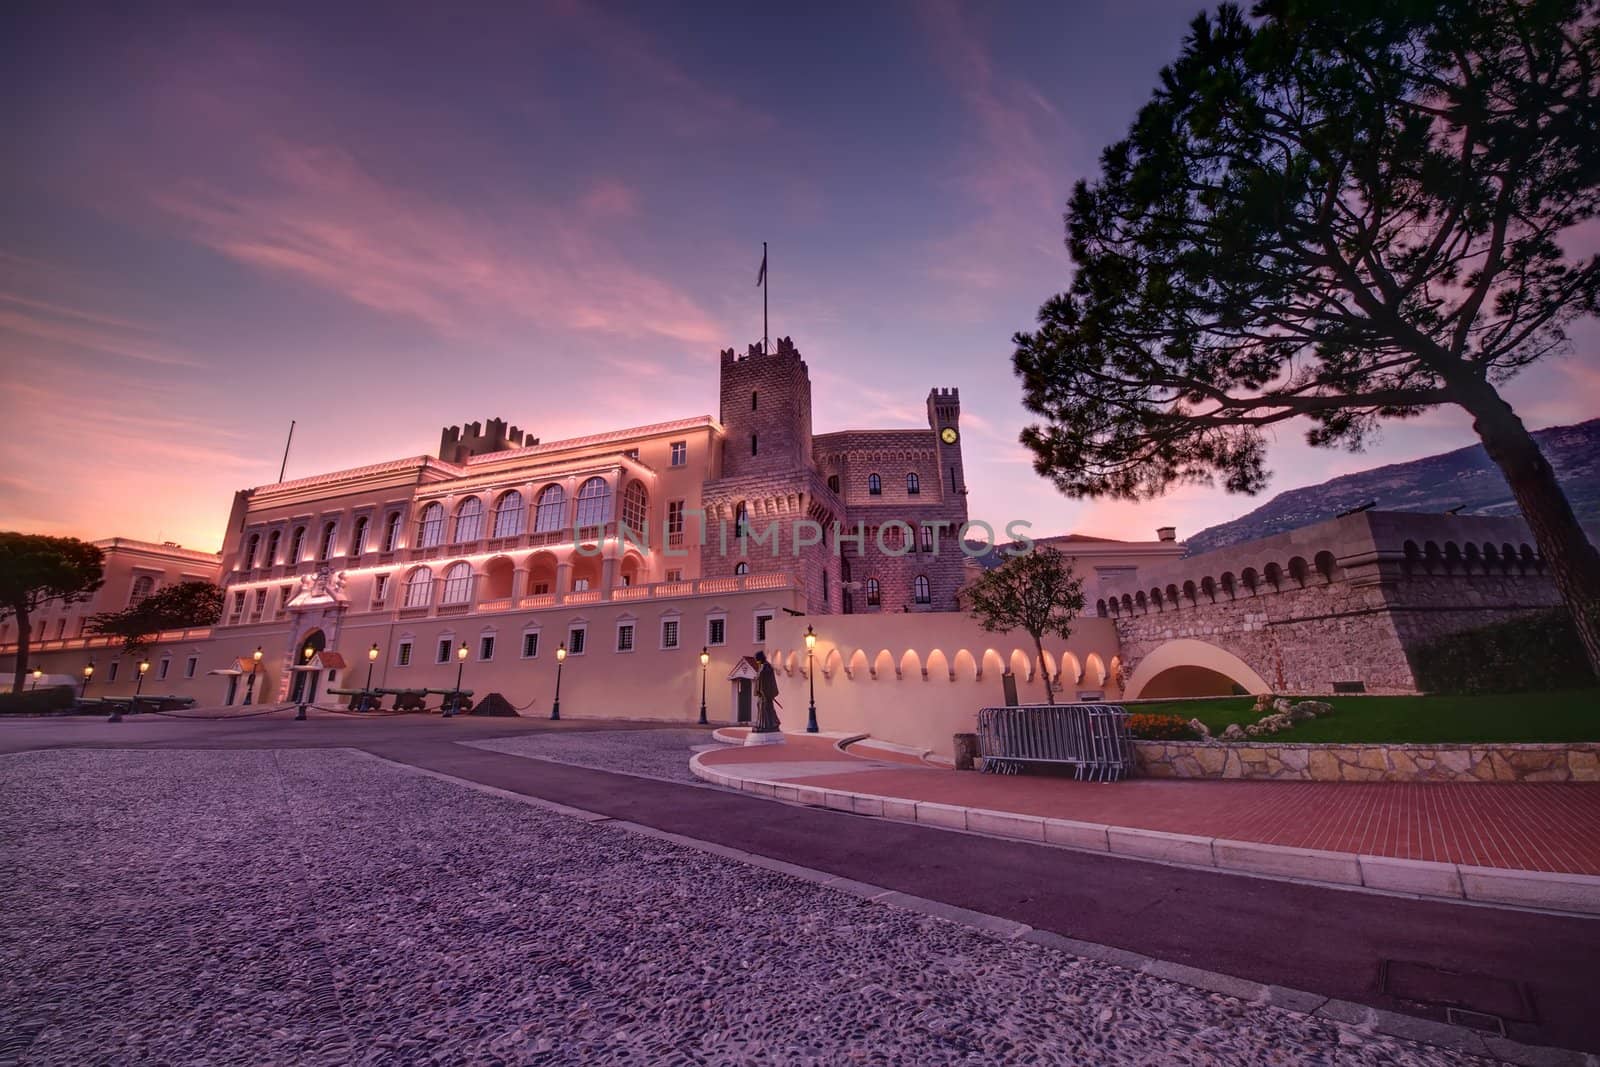 sunset at Prince's Palace in Monaco